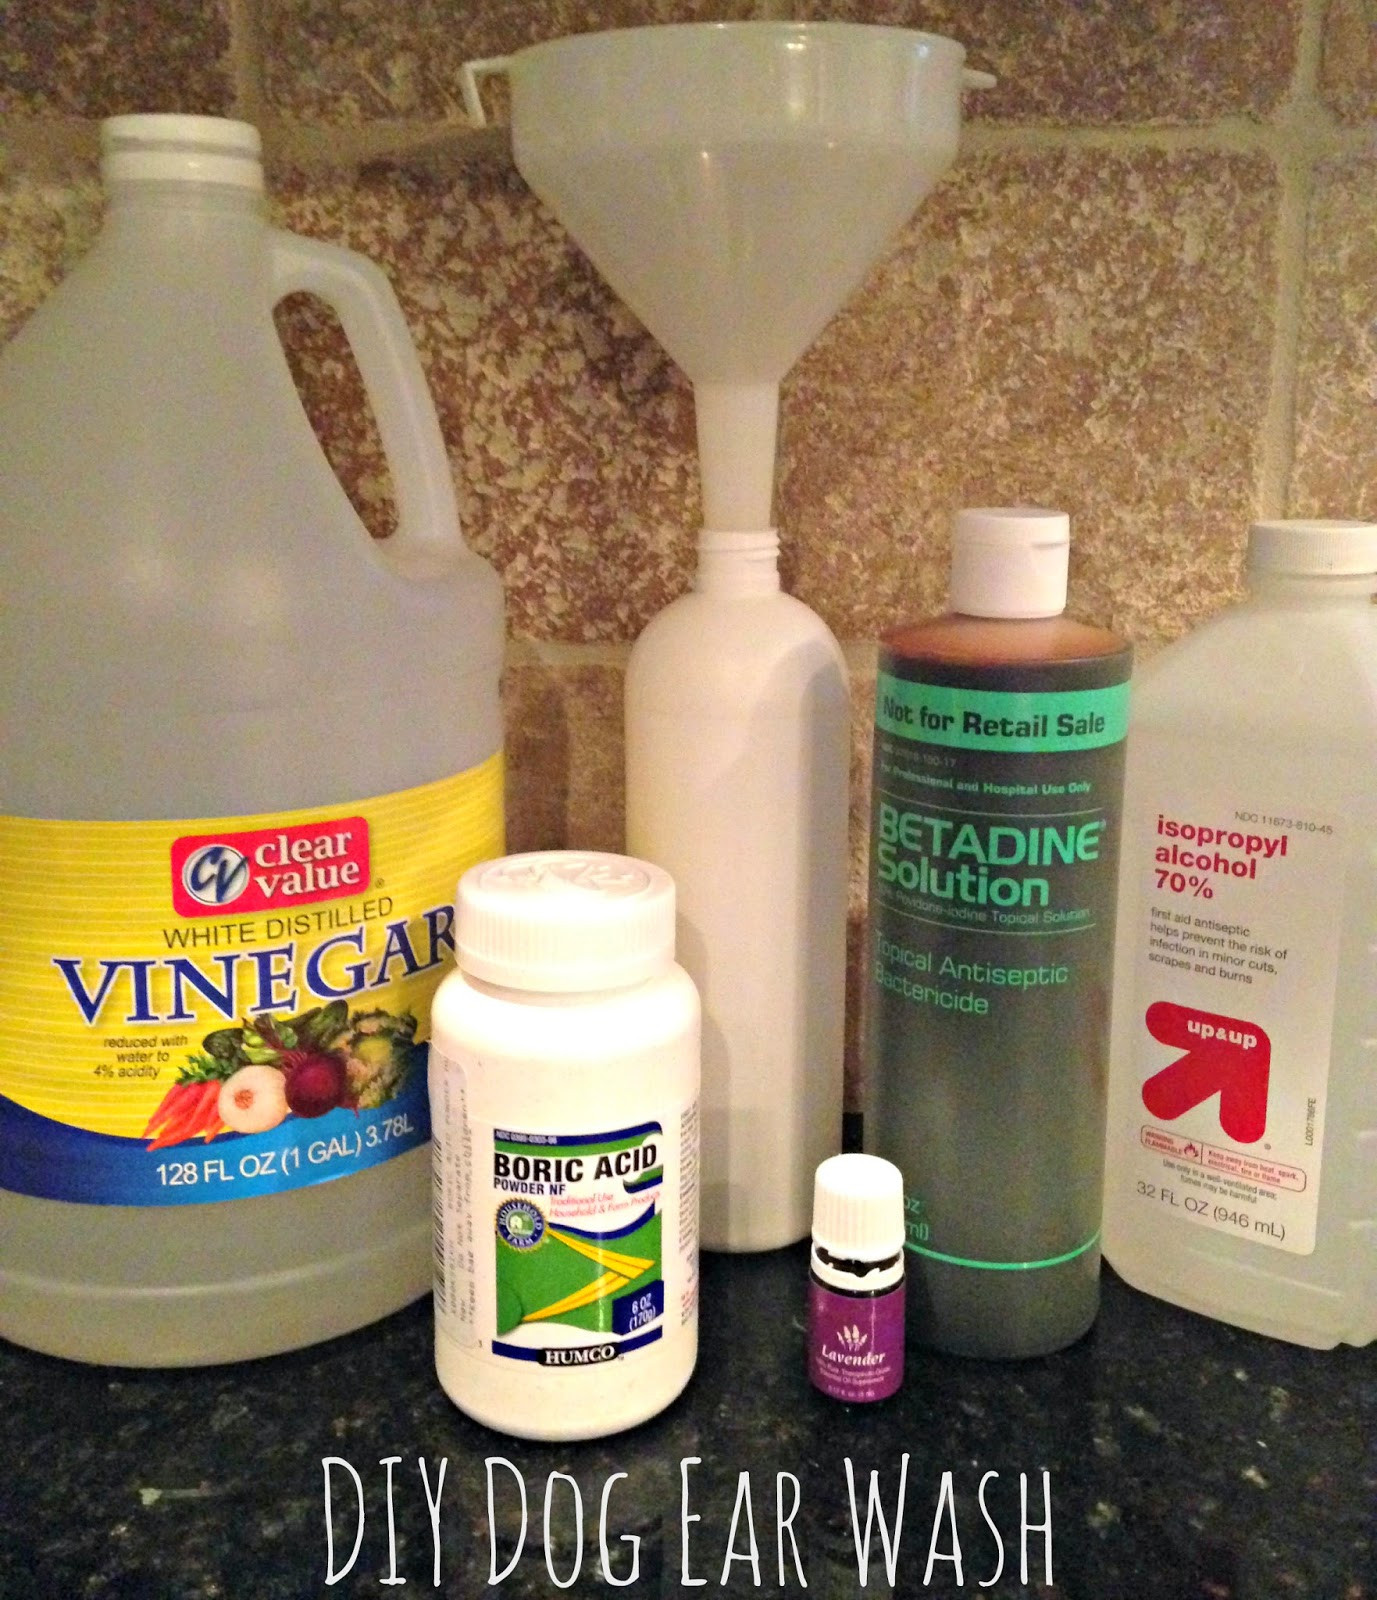 DIY Dog Ear Wash
 The Chenry Show DIY Dog Ear Infection Cleaner